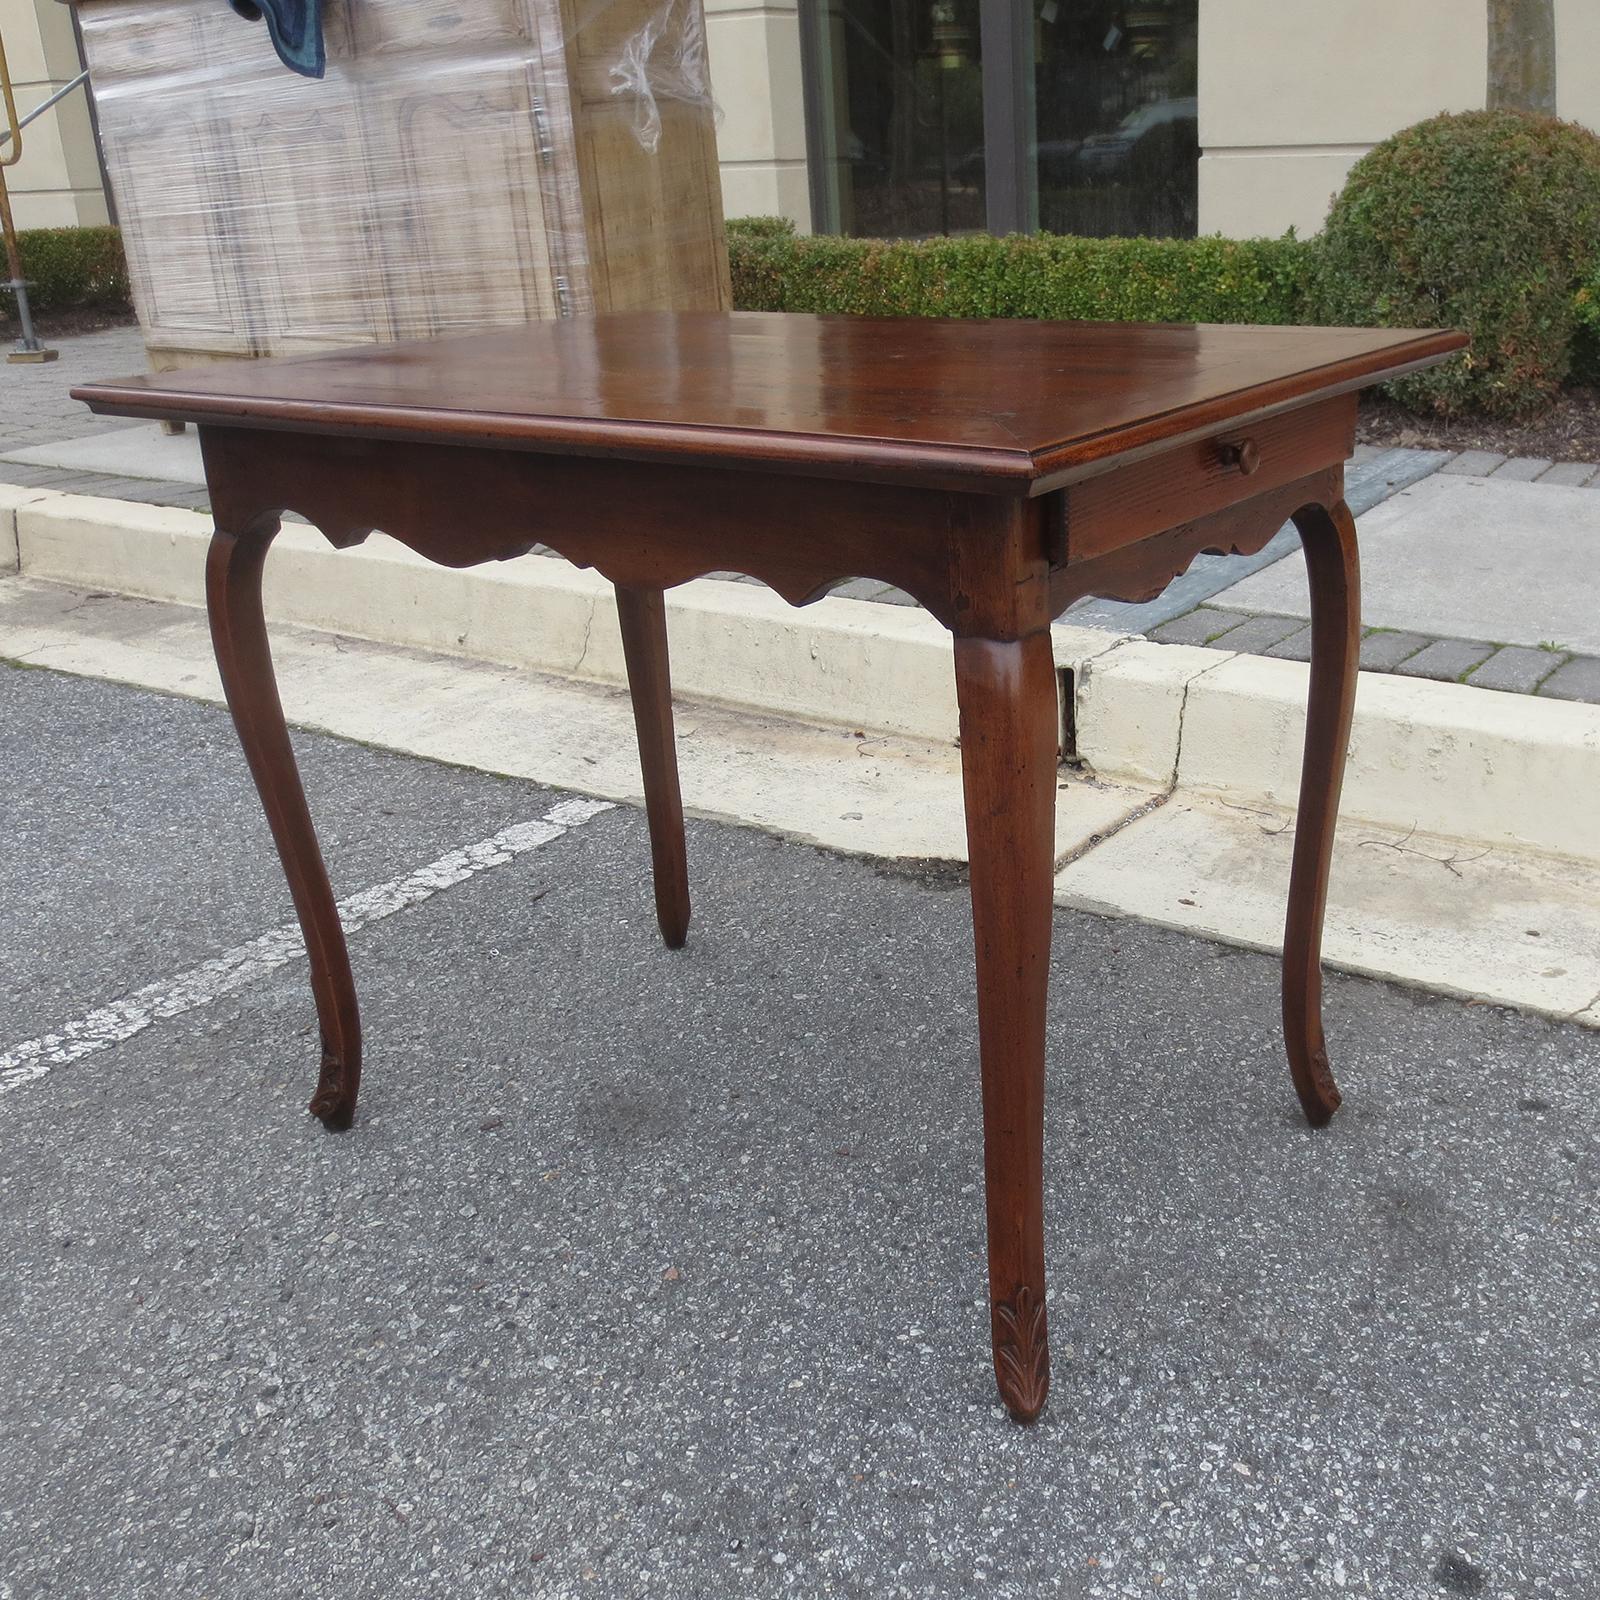 18th-19th century fruitwood side table with one drawer.